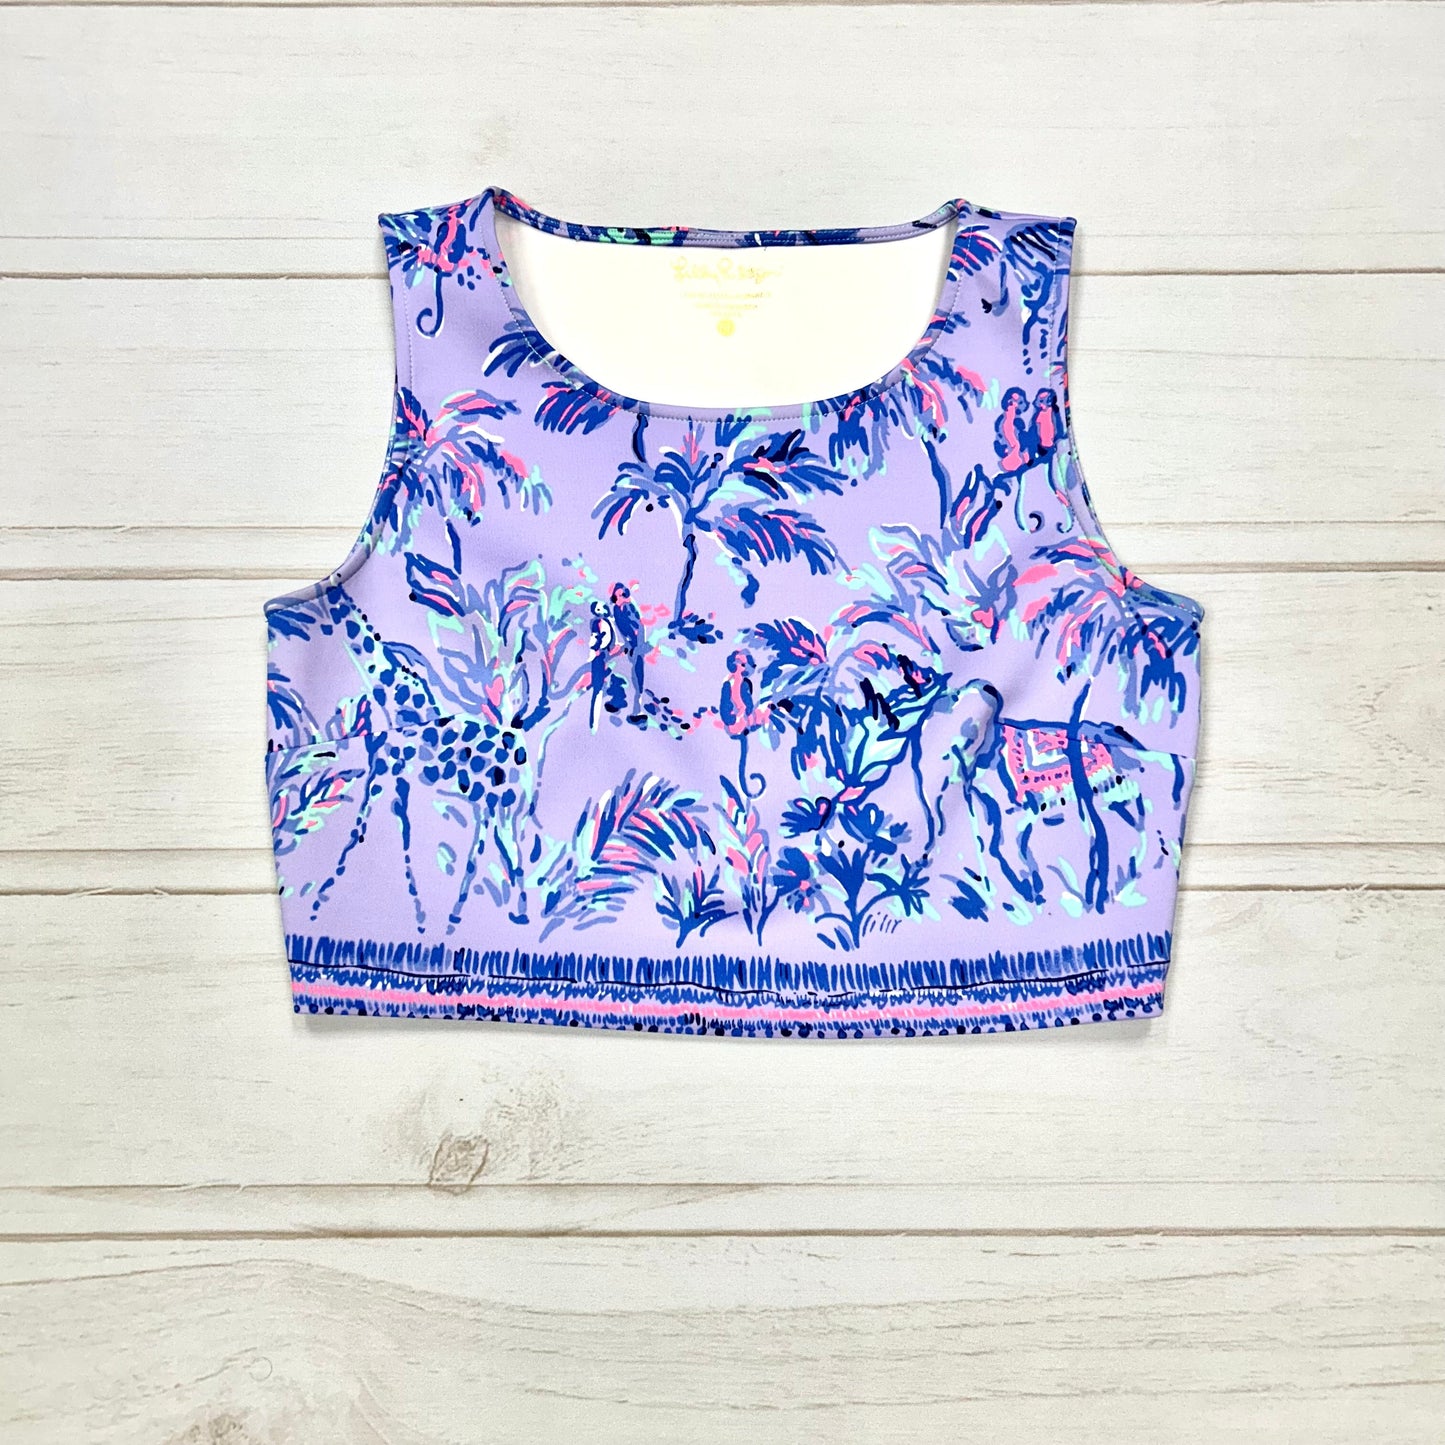 Top Sleeveless Designer By Lilly Pulitzer  Size: M